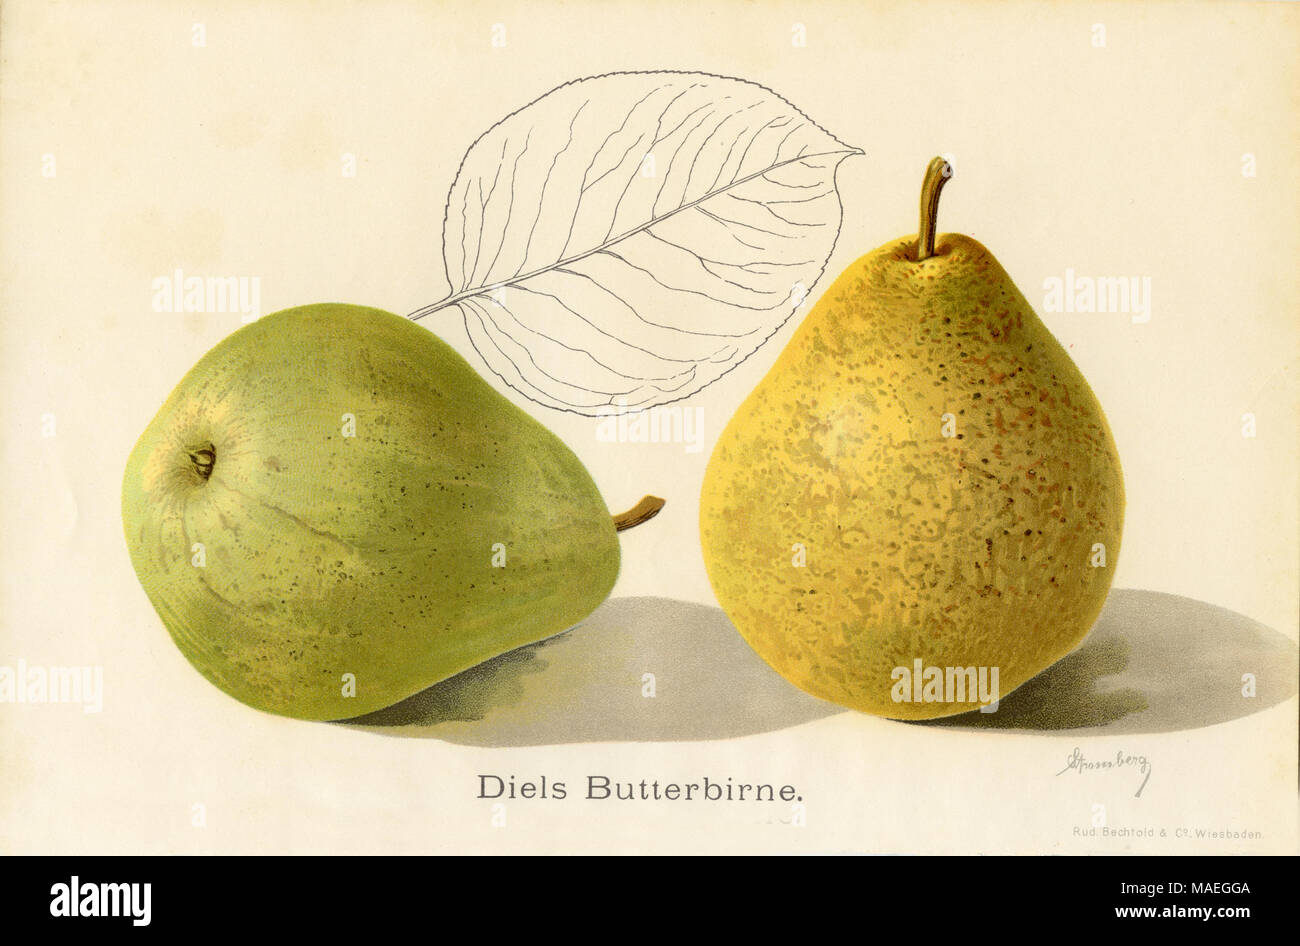 Pear, pear variety: Diels butter pear, L. Stromberg, created , published Stock Photo